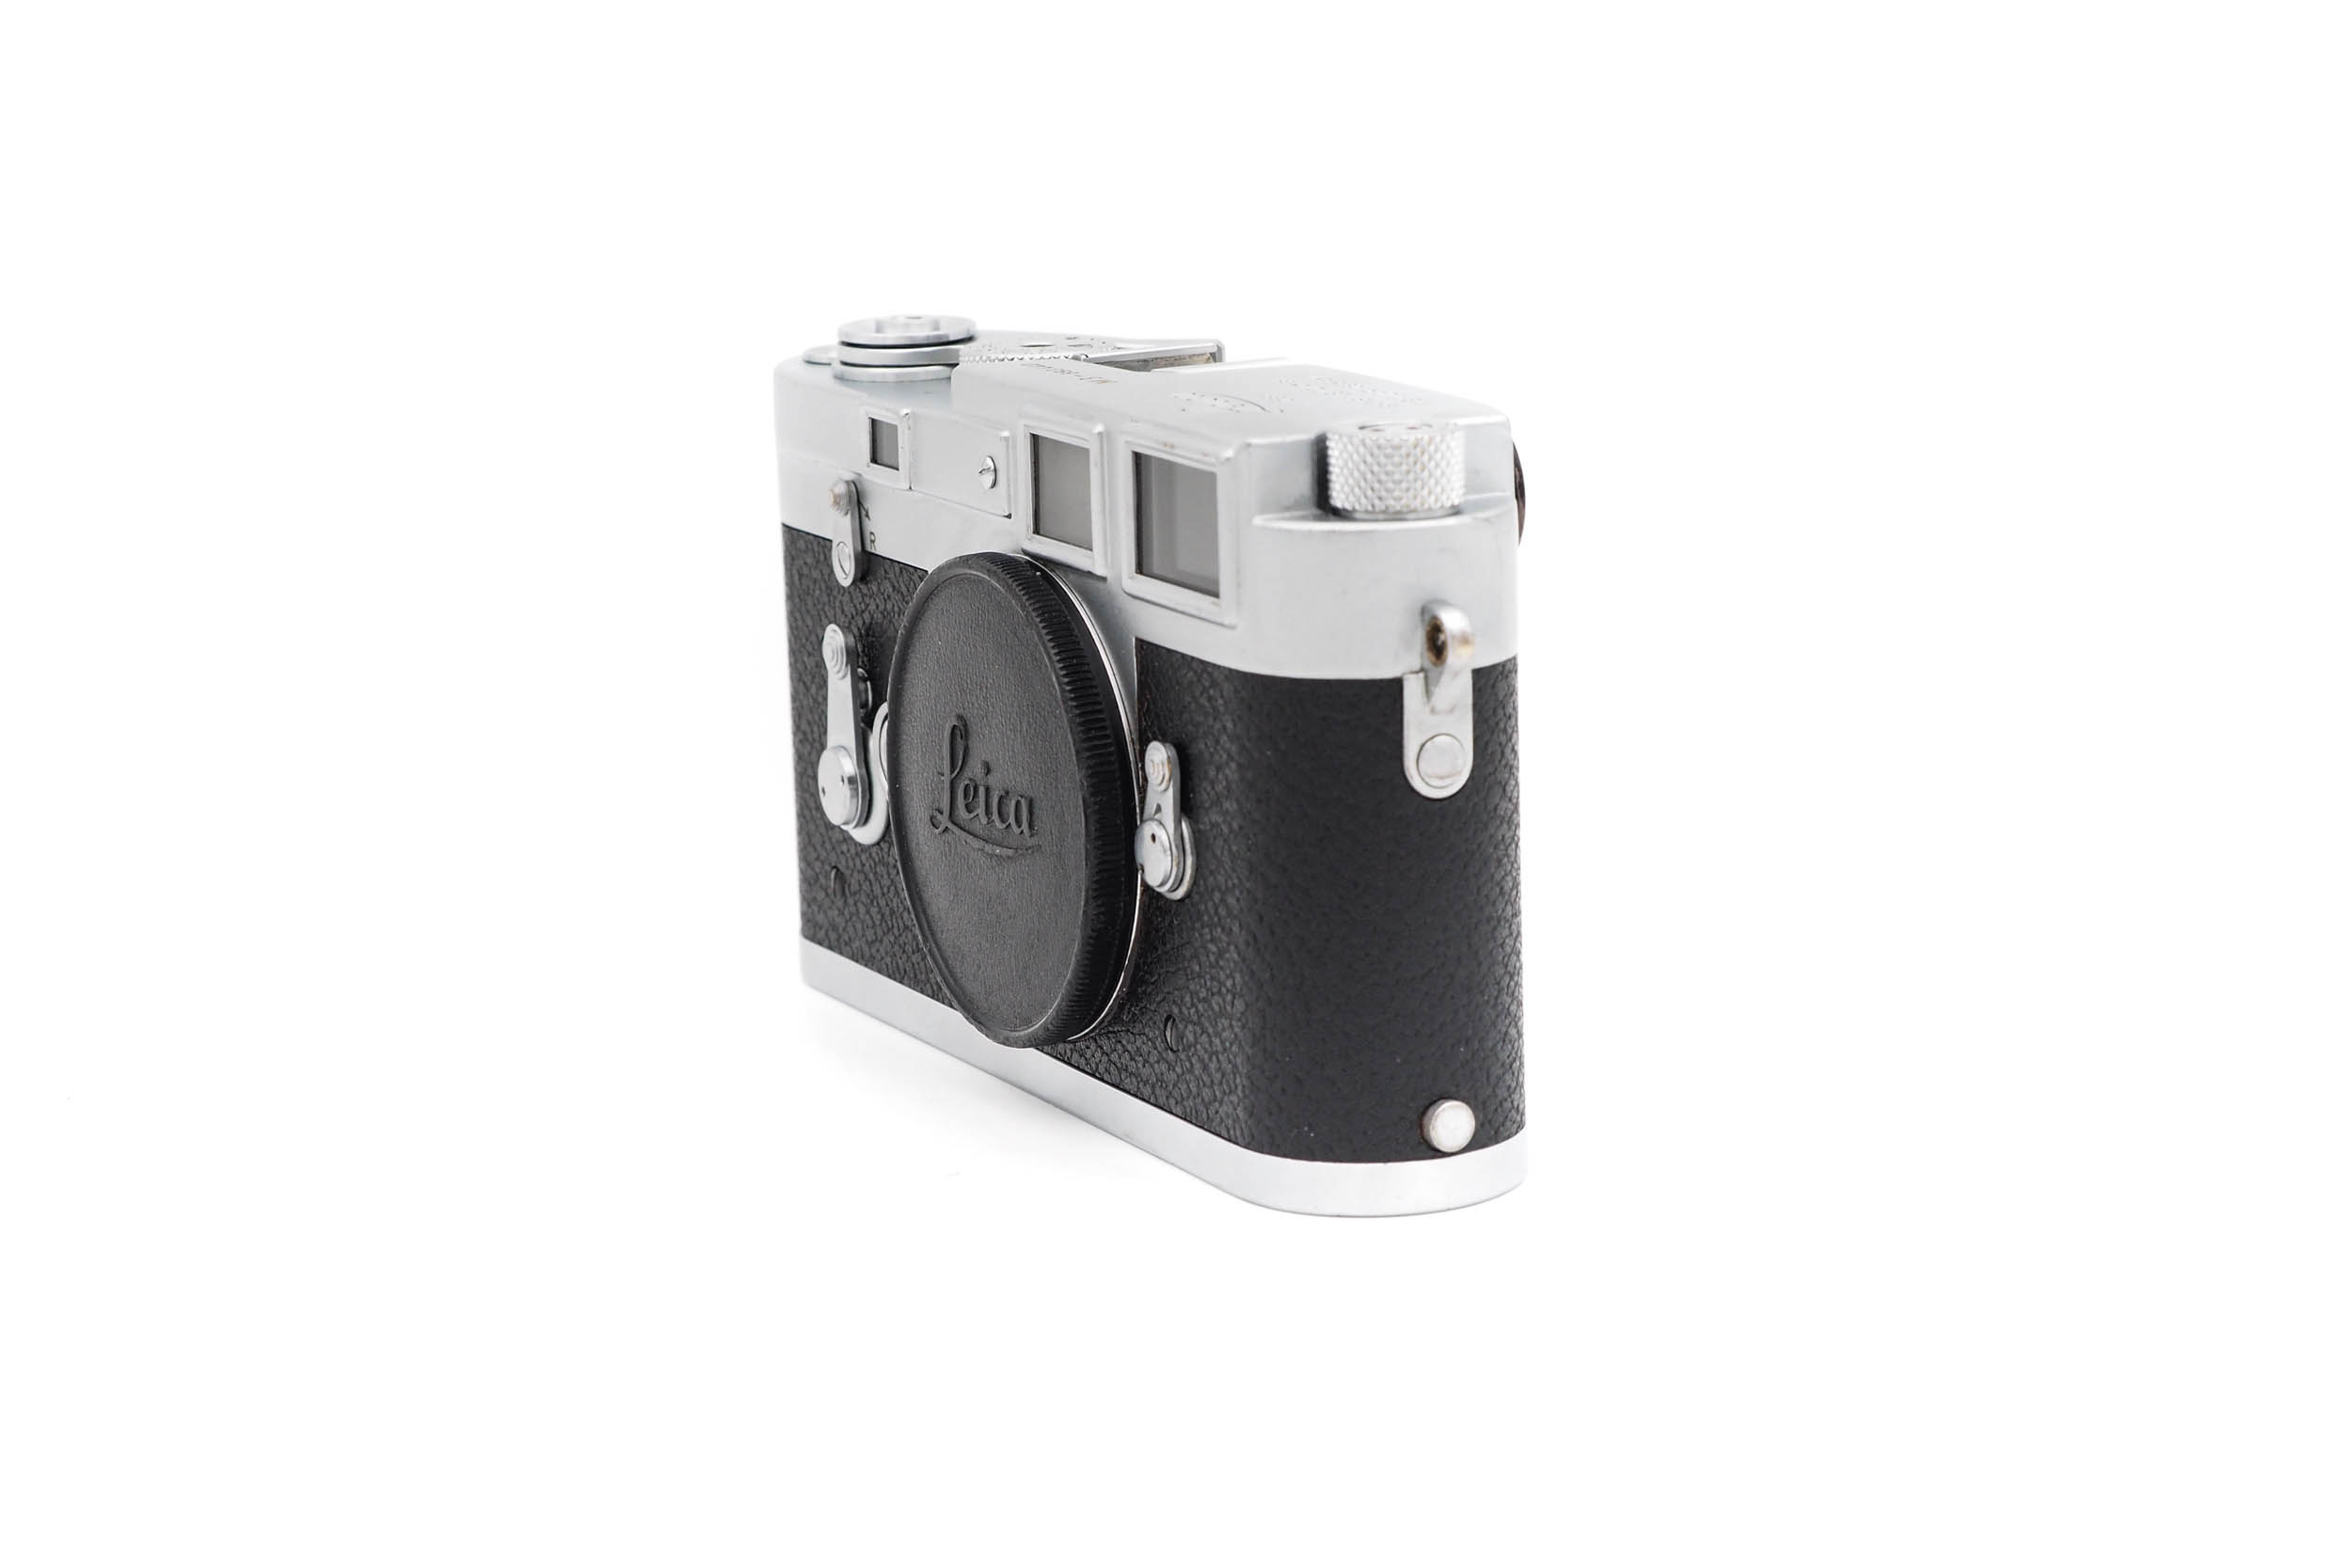 Leica M3 Silver Double Stroke Yr.1957 フィルムカメラ ...